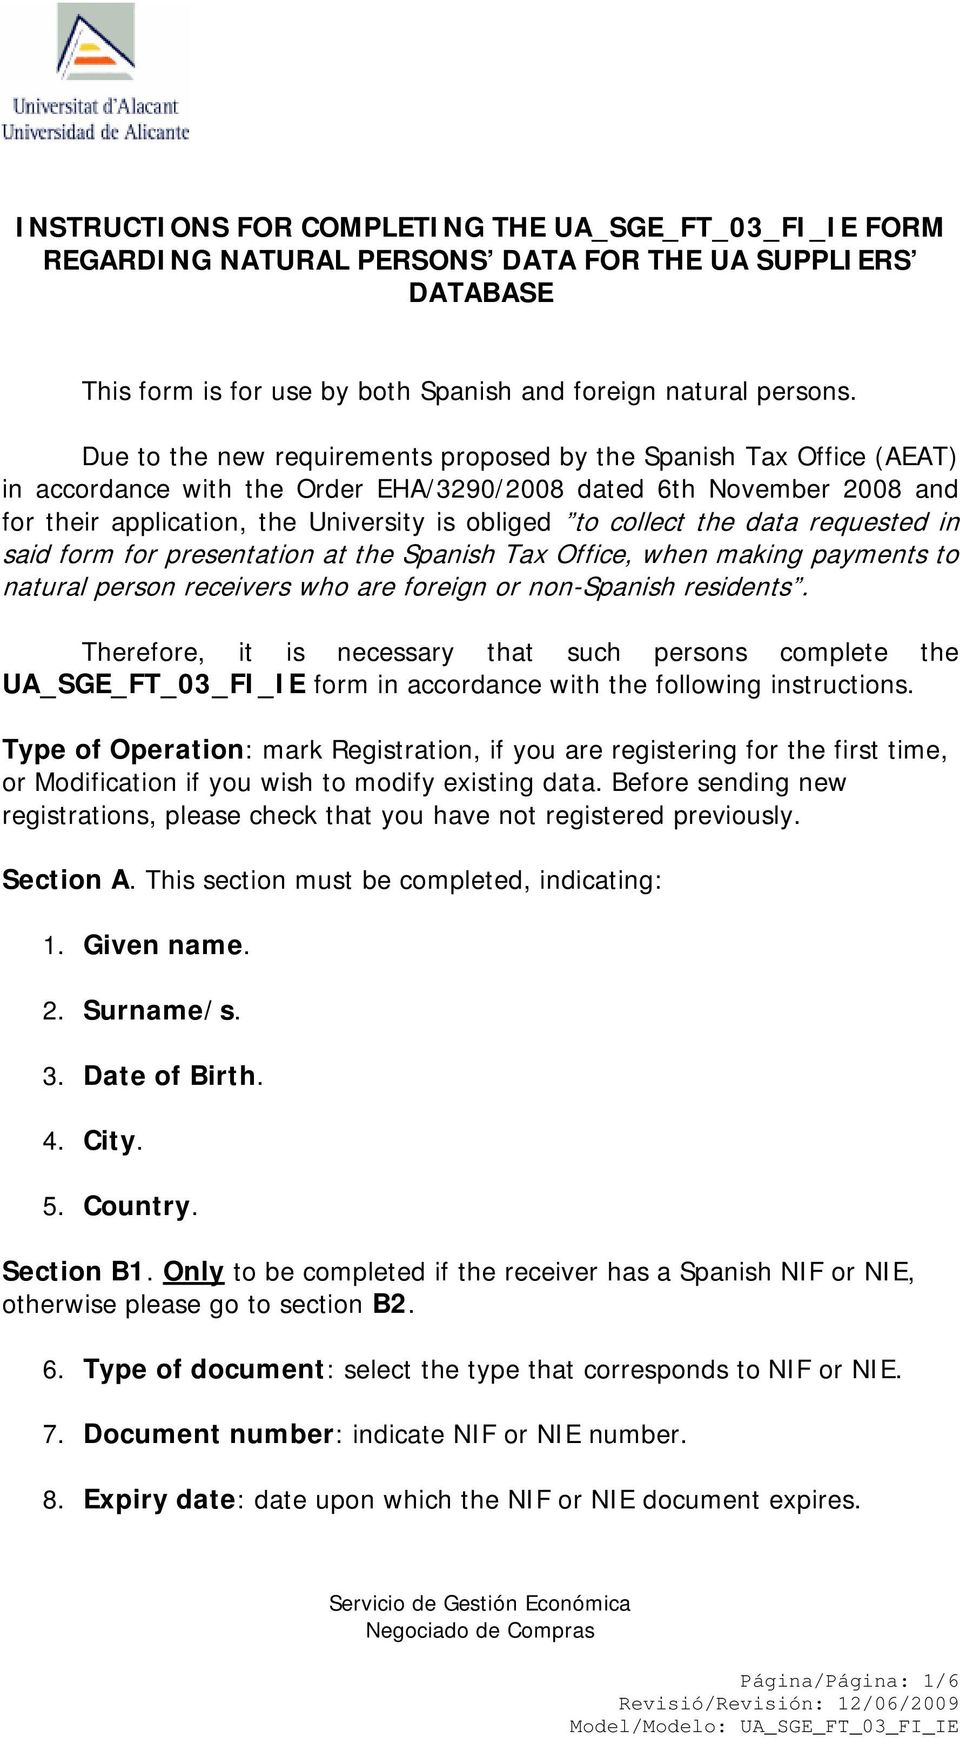 collect the data requested in said form for presentation at the Spanish Tax Office, when making payments to natural person receivers who are foreign or non-spanish residents.